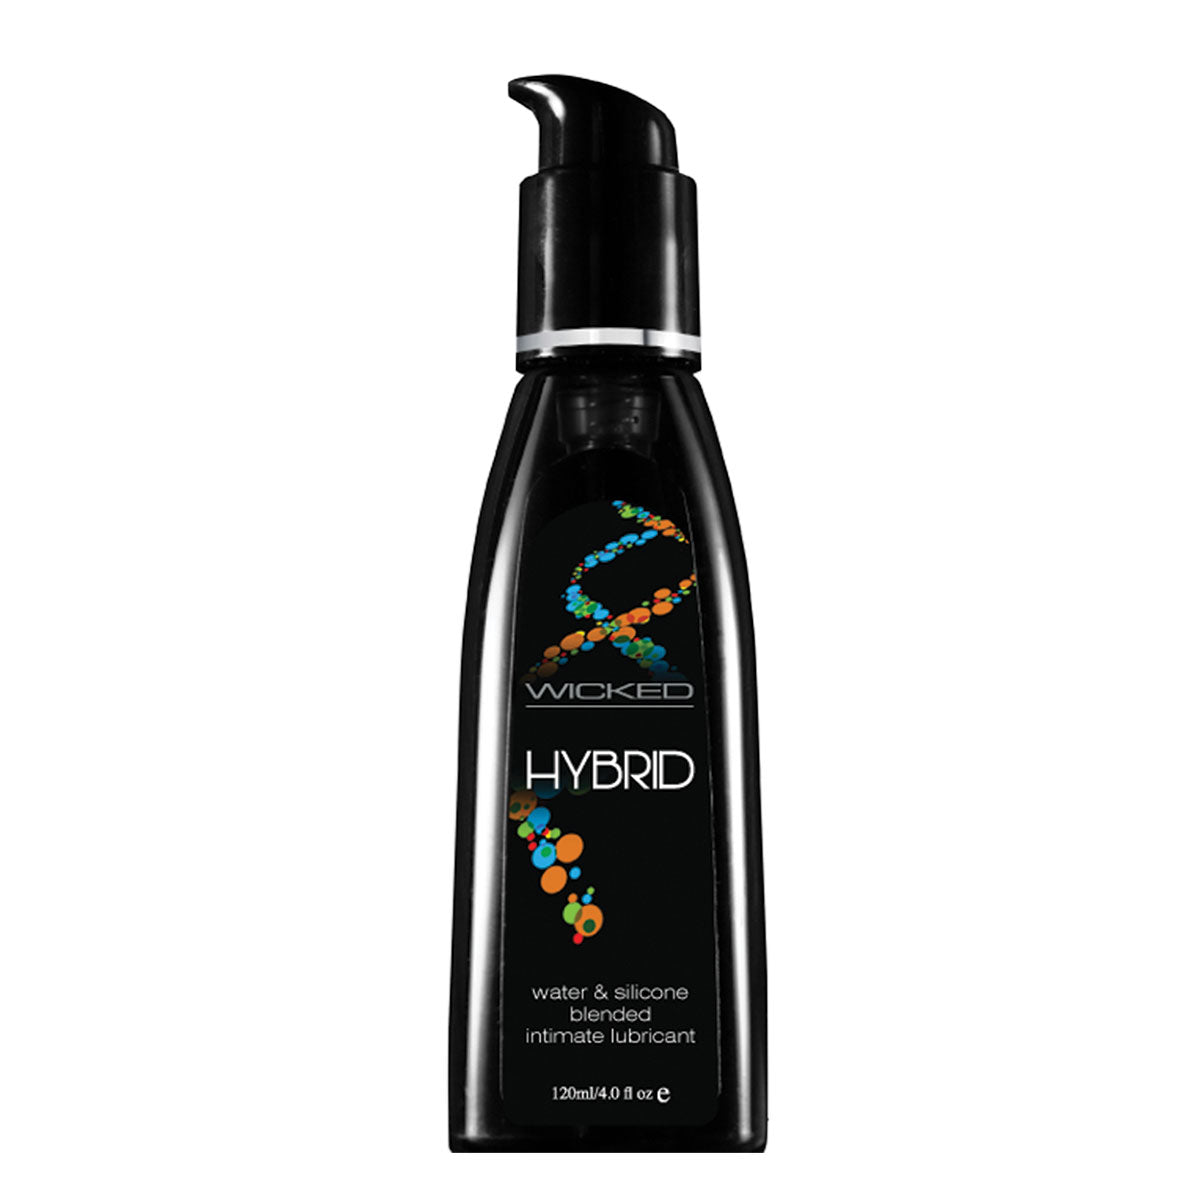 Wicked Sensual Care Hybrid Water & Silicone Blended Lubricant